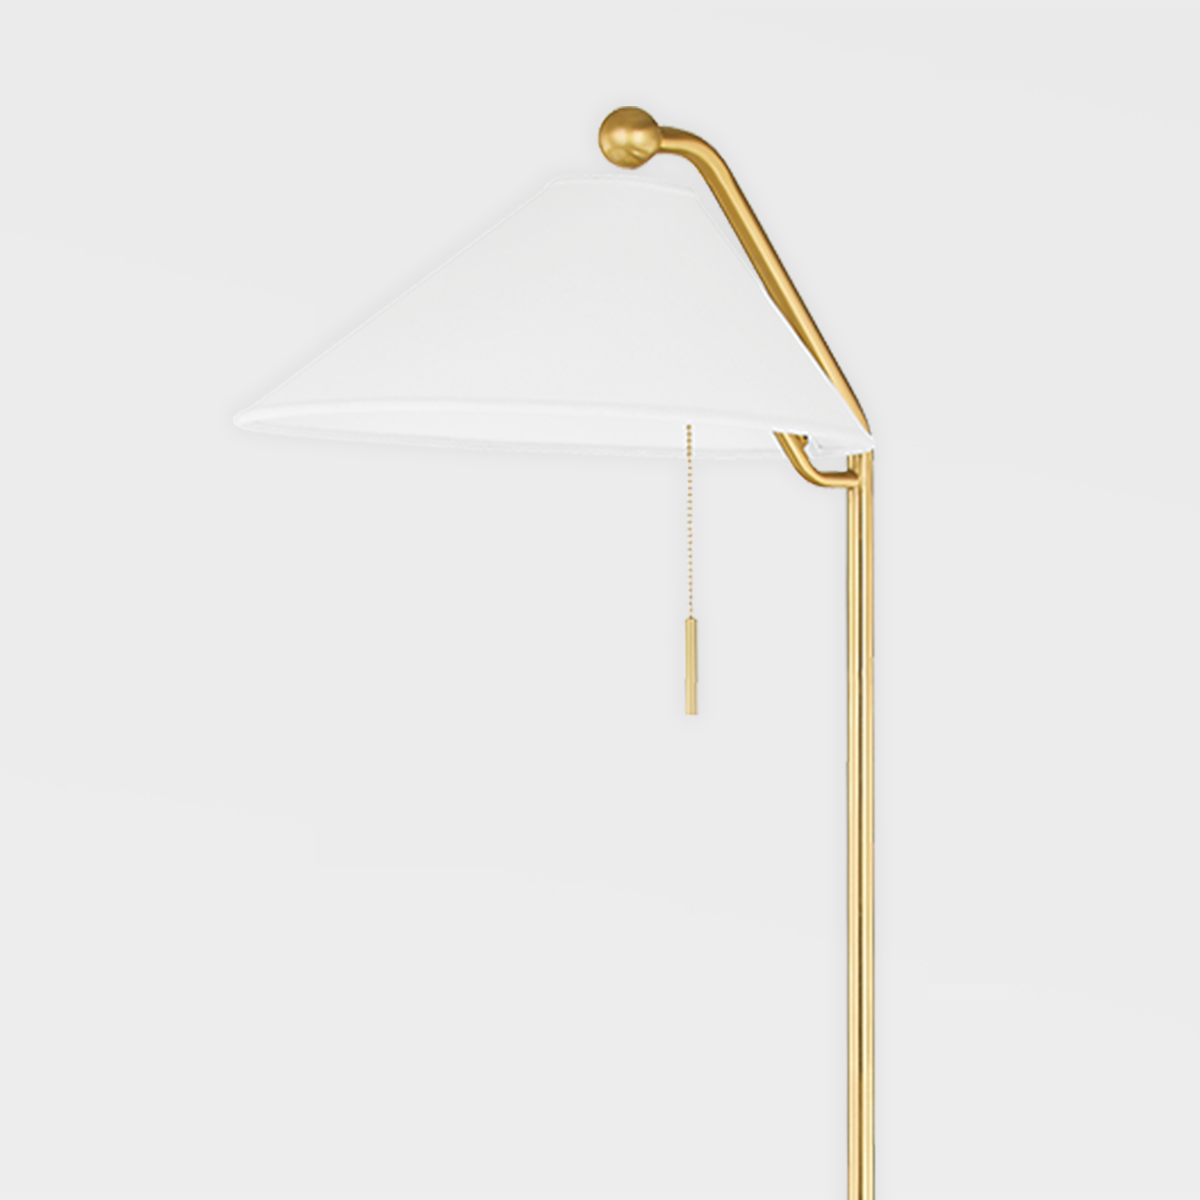 Steel Angled Arm with Shell Shaped White Linen Shade Floor Lamp